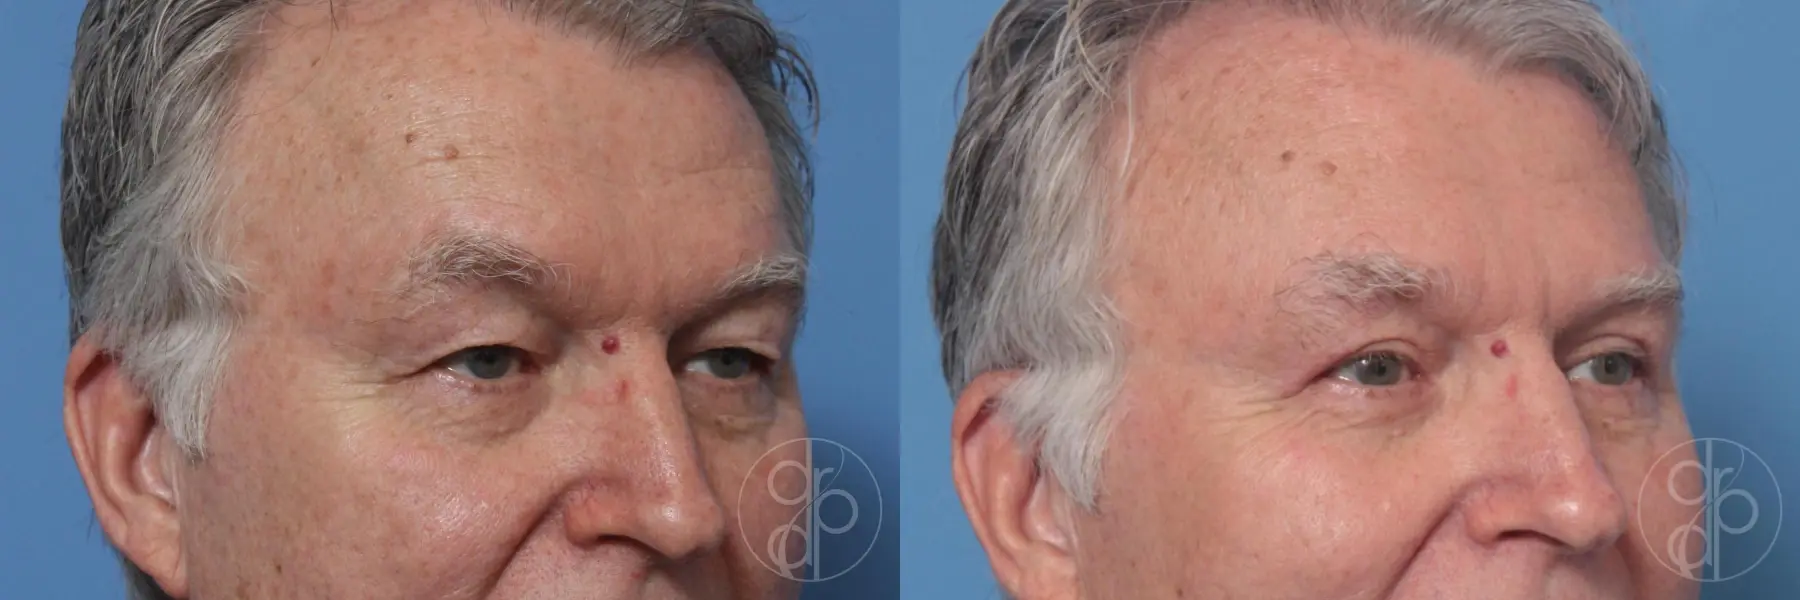 patient 10268 blepharoplasty before and after result - Before and After 2